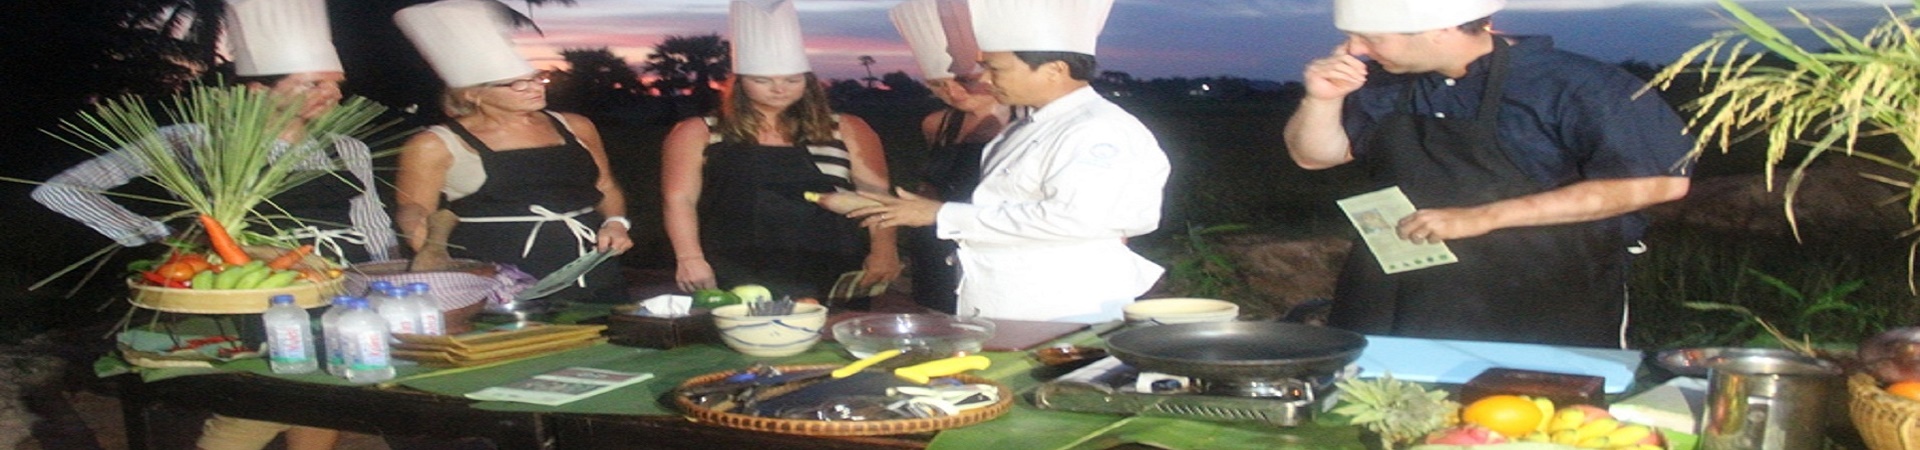 Image of Culinary Cambodia Siem Reap